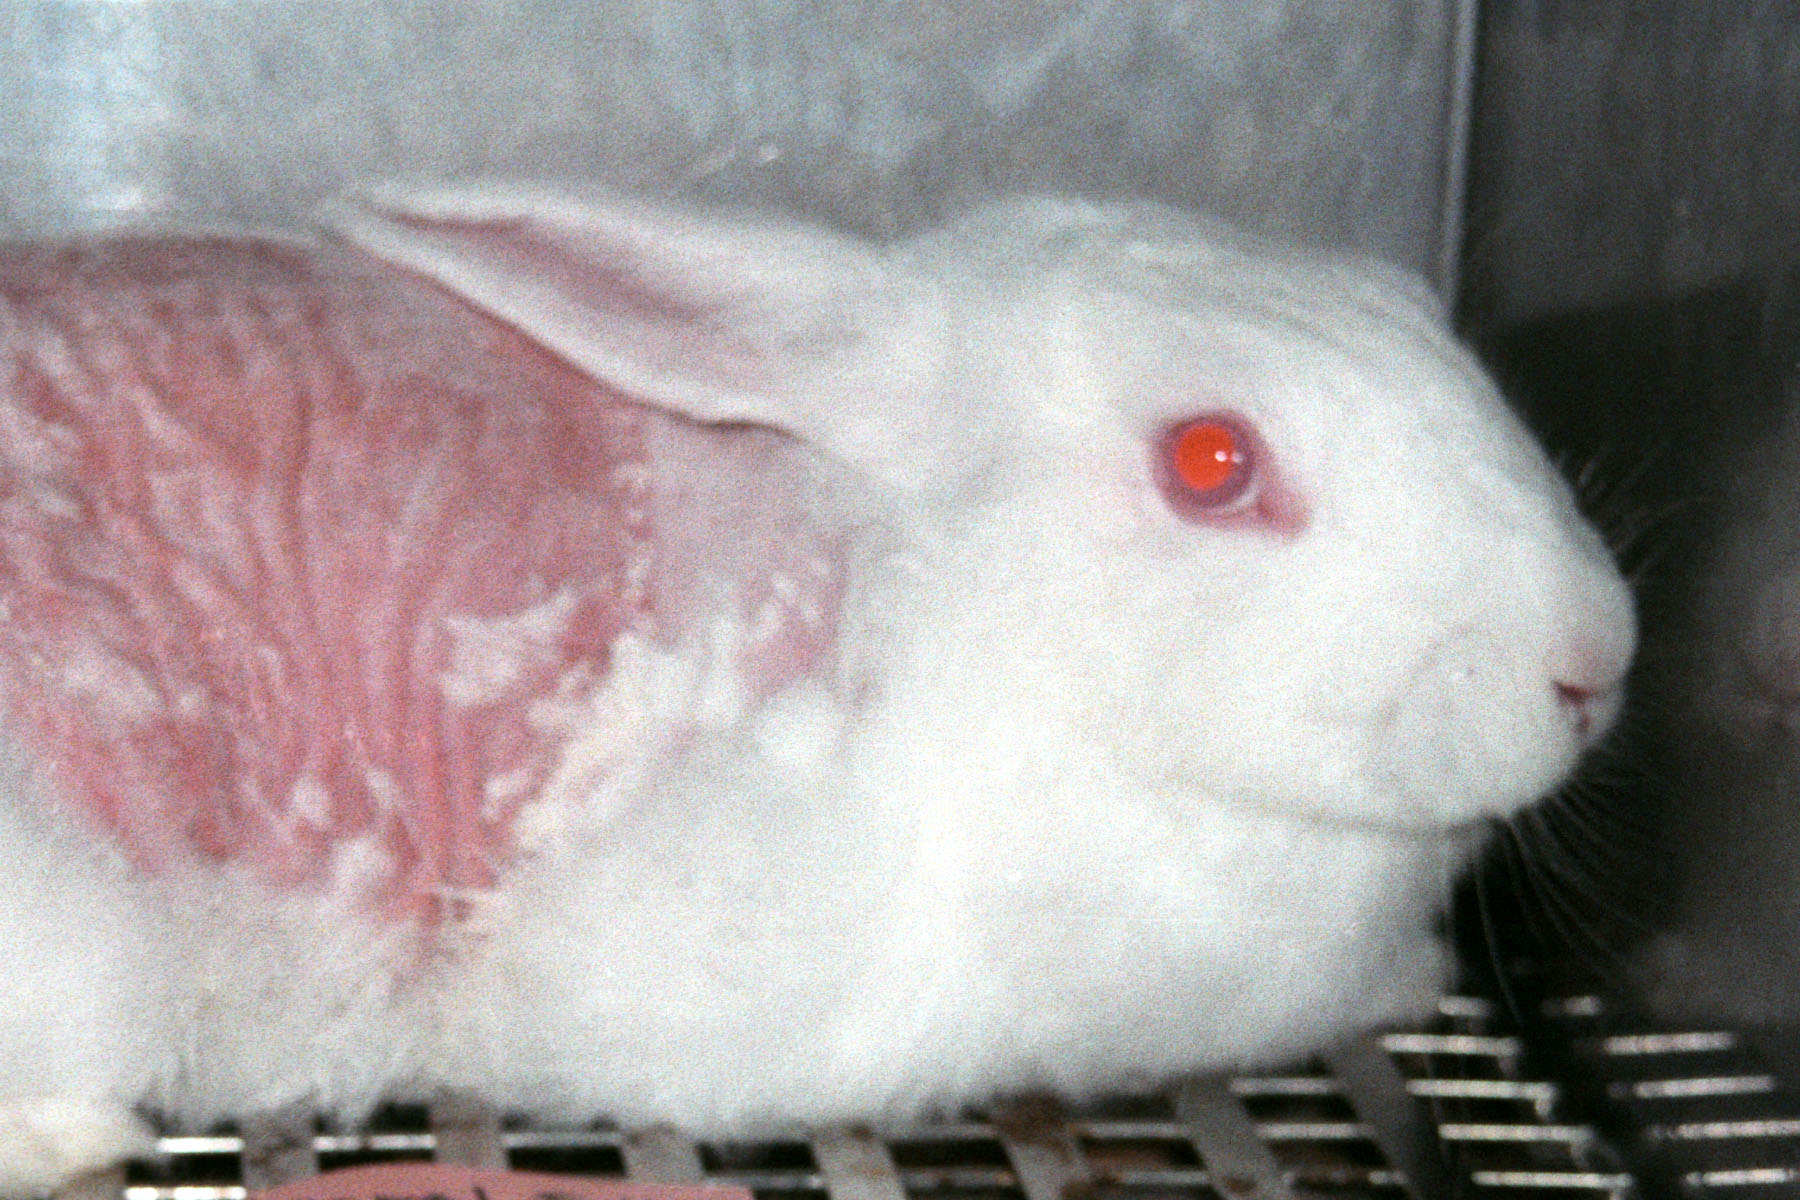 You Can Save Animals From Deadly Product Tests!